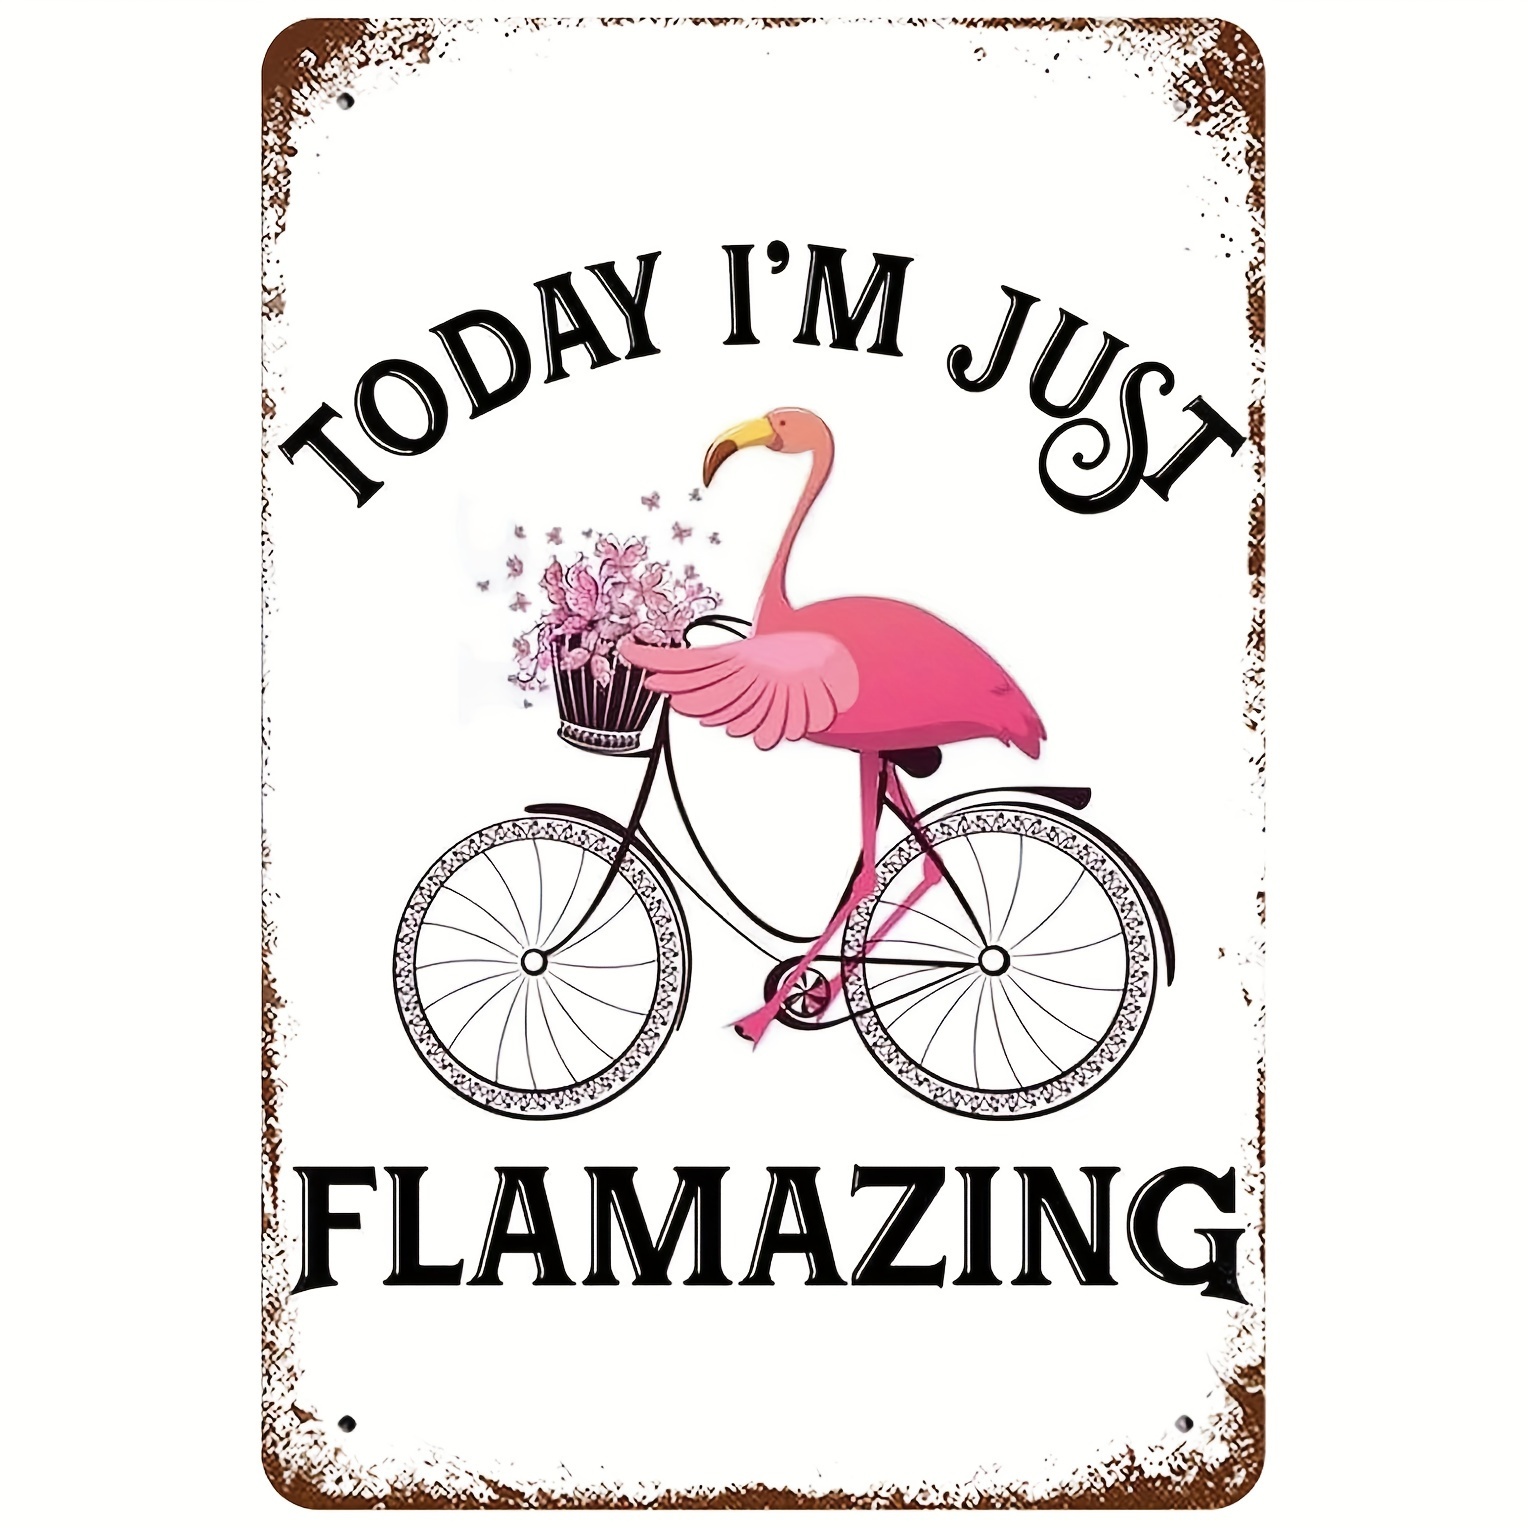 

1pc Vintage Funny Pink Flamingo Wall Decor, Today I M Just Flamazing Hawaii Aloha Bicycle Floral Poster Art, For Home Living Room Bedroom Garden Garage Office Cafe Bar Pub 8x12 Inch